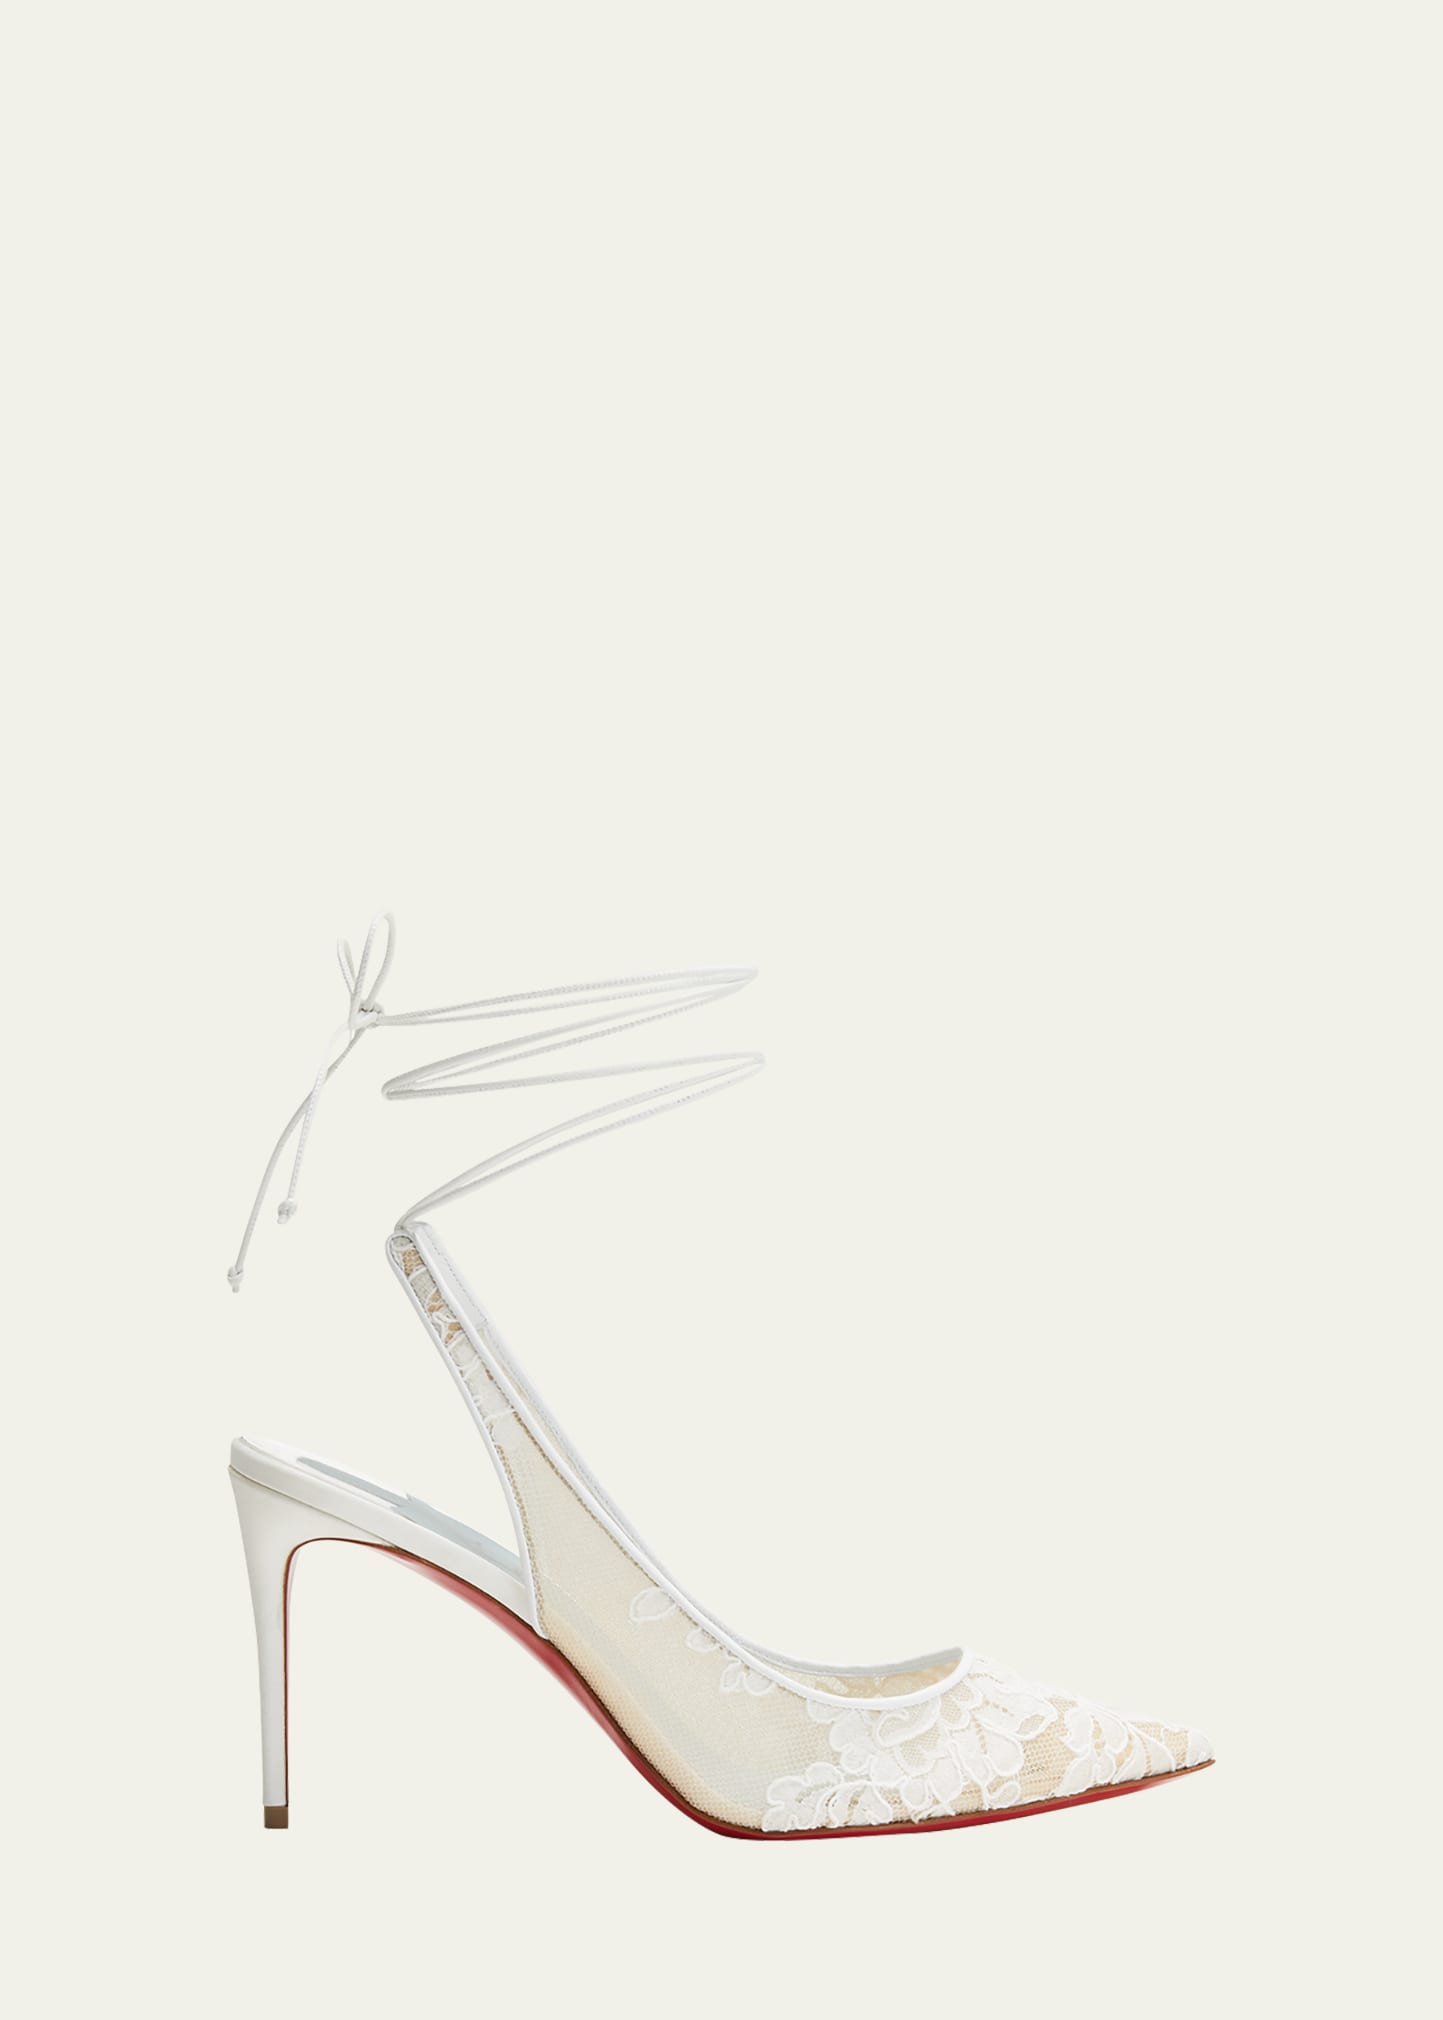 Christian Louboutin Kate Lace Red Sole Ankle-Tie Pumps